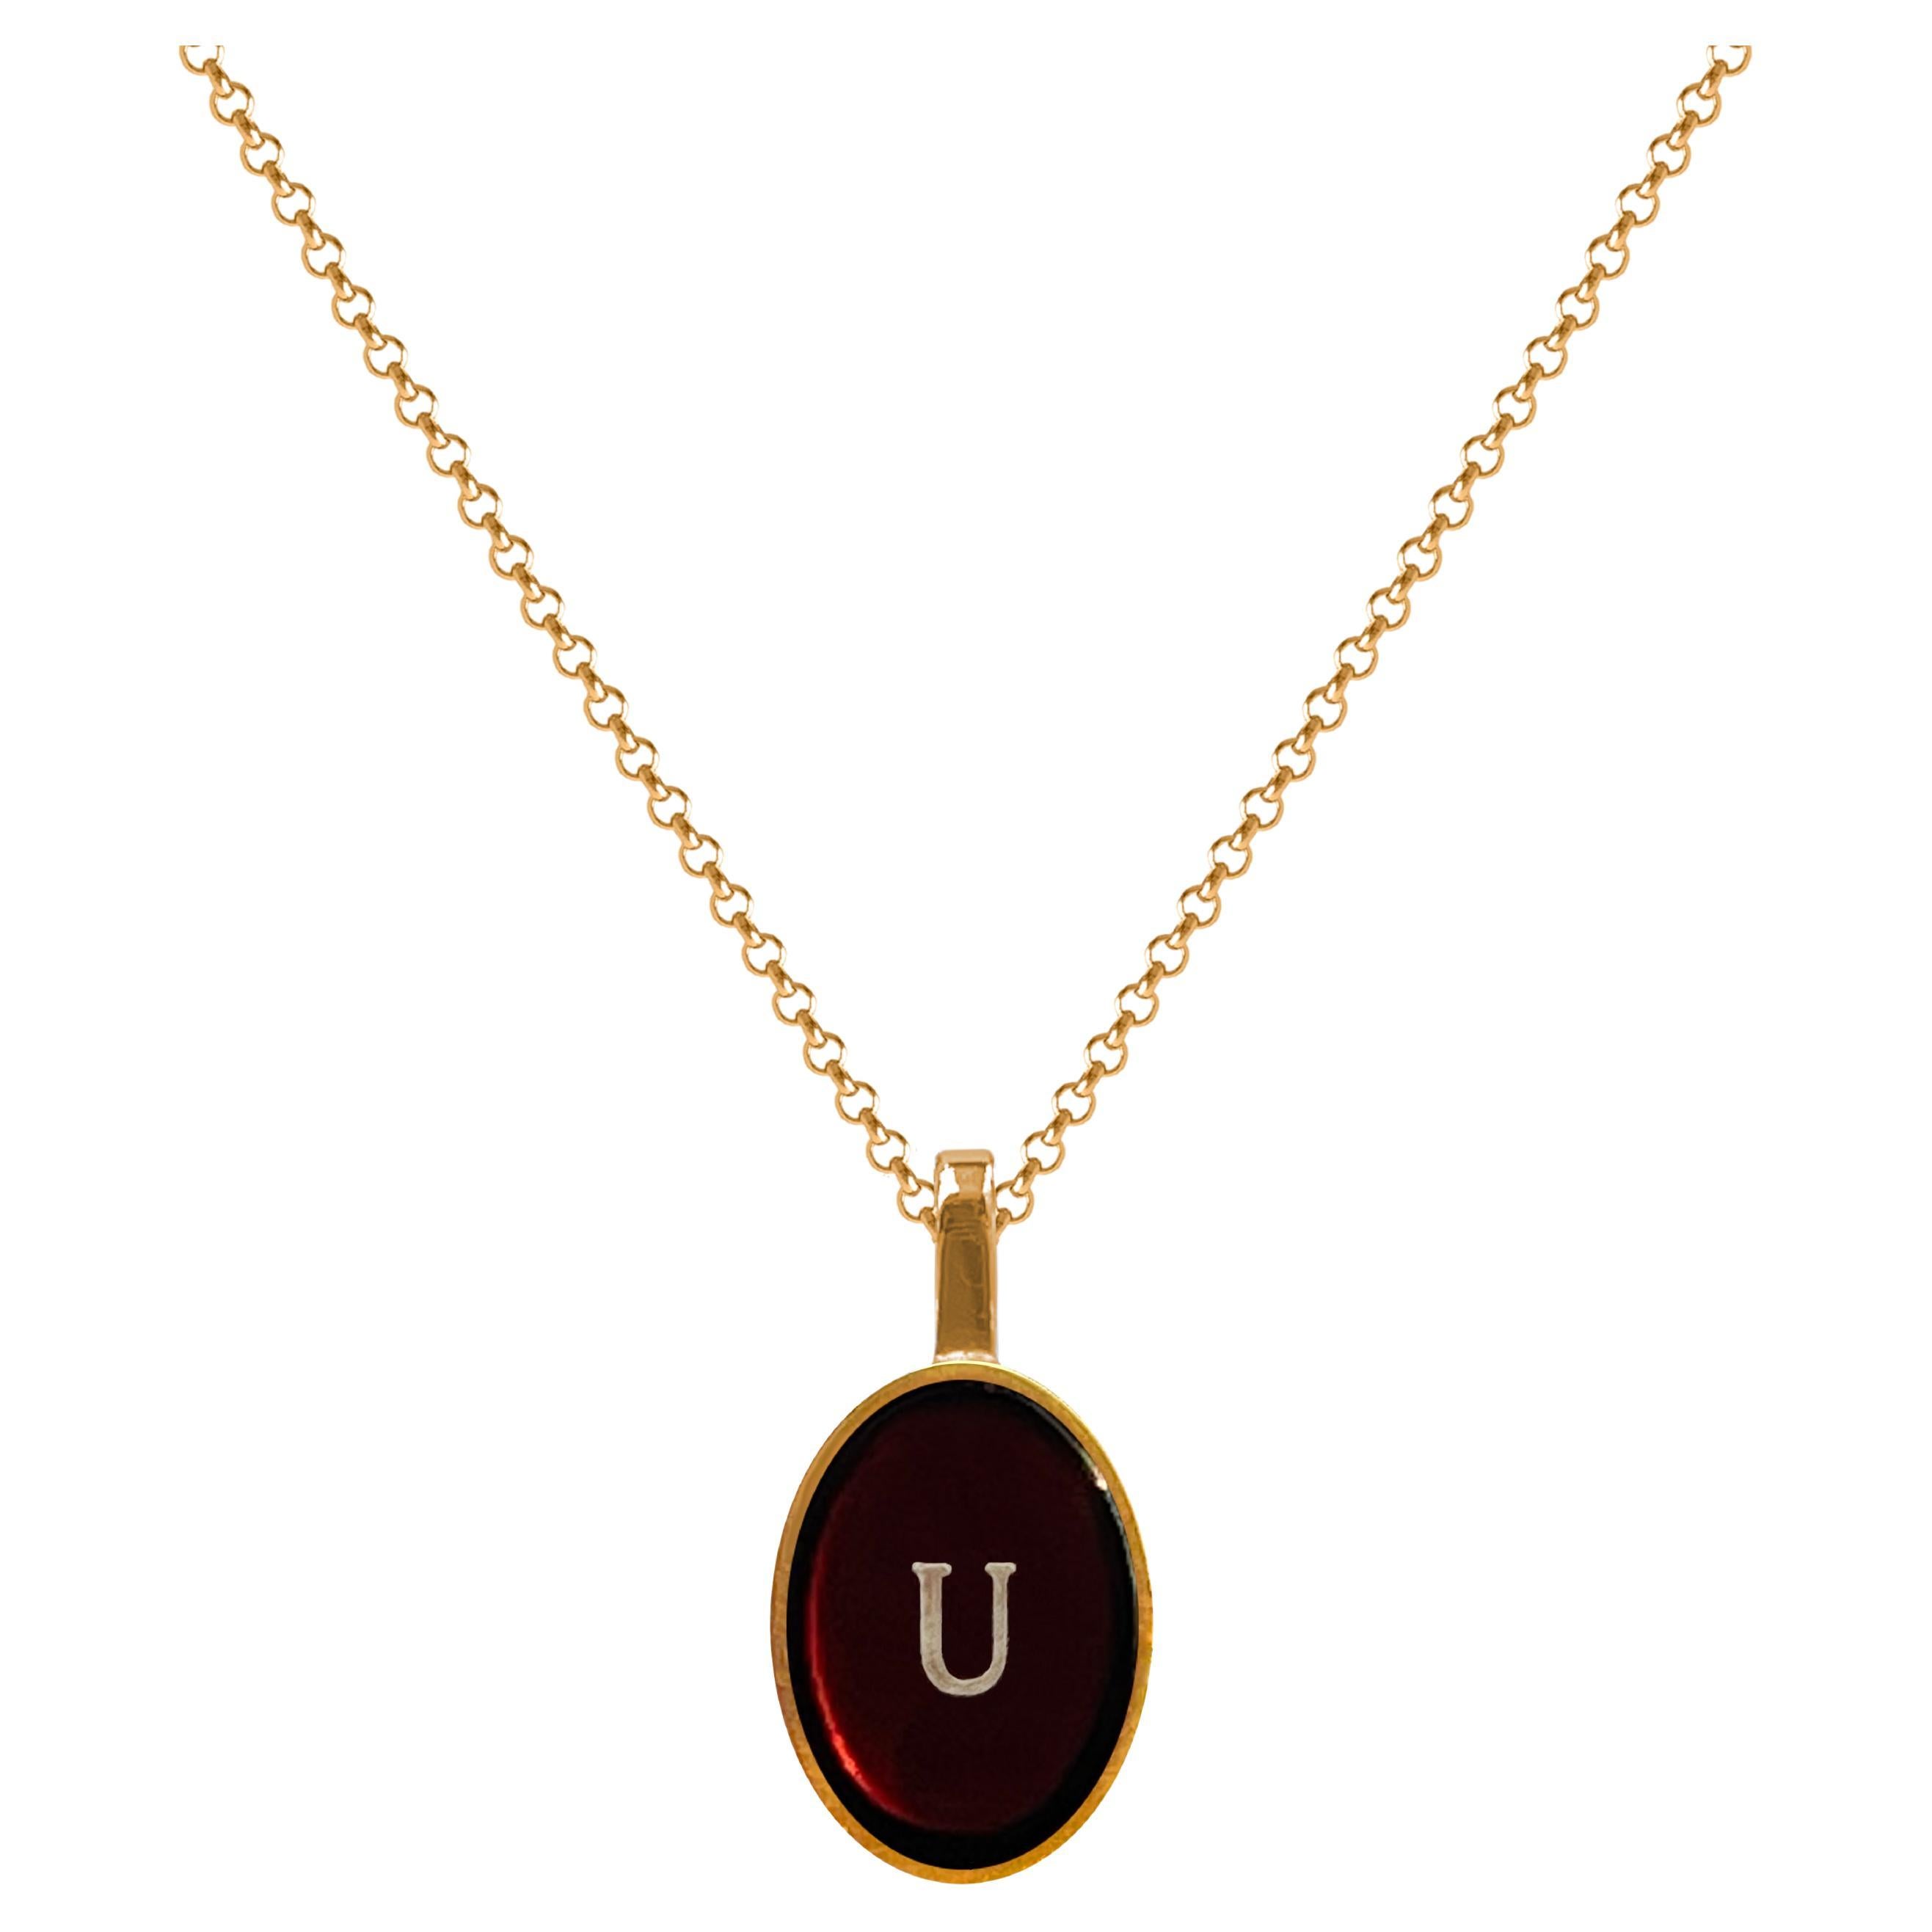 Necklace with amber pendant and name letter gold - U For Sale